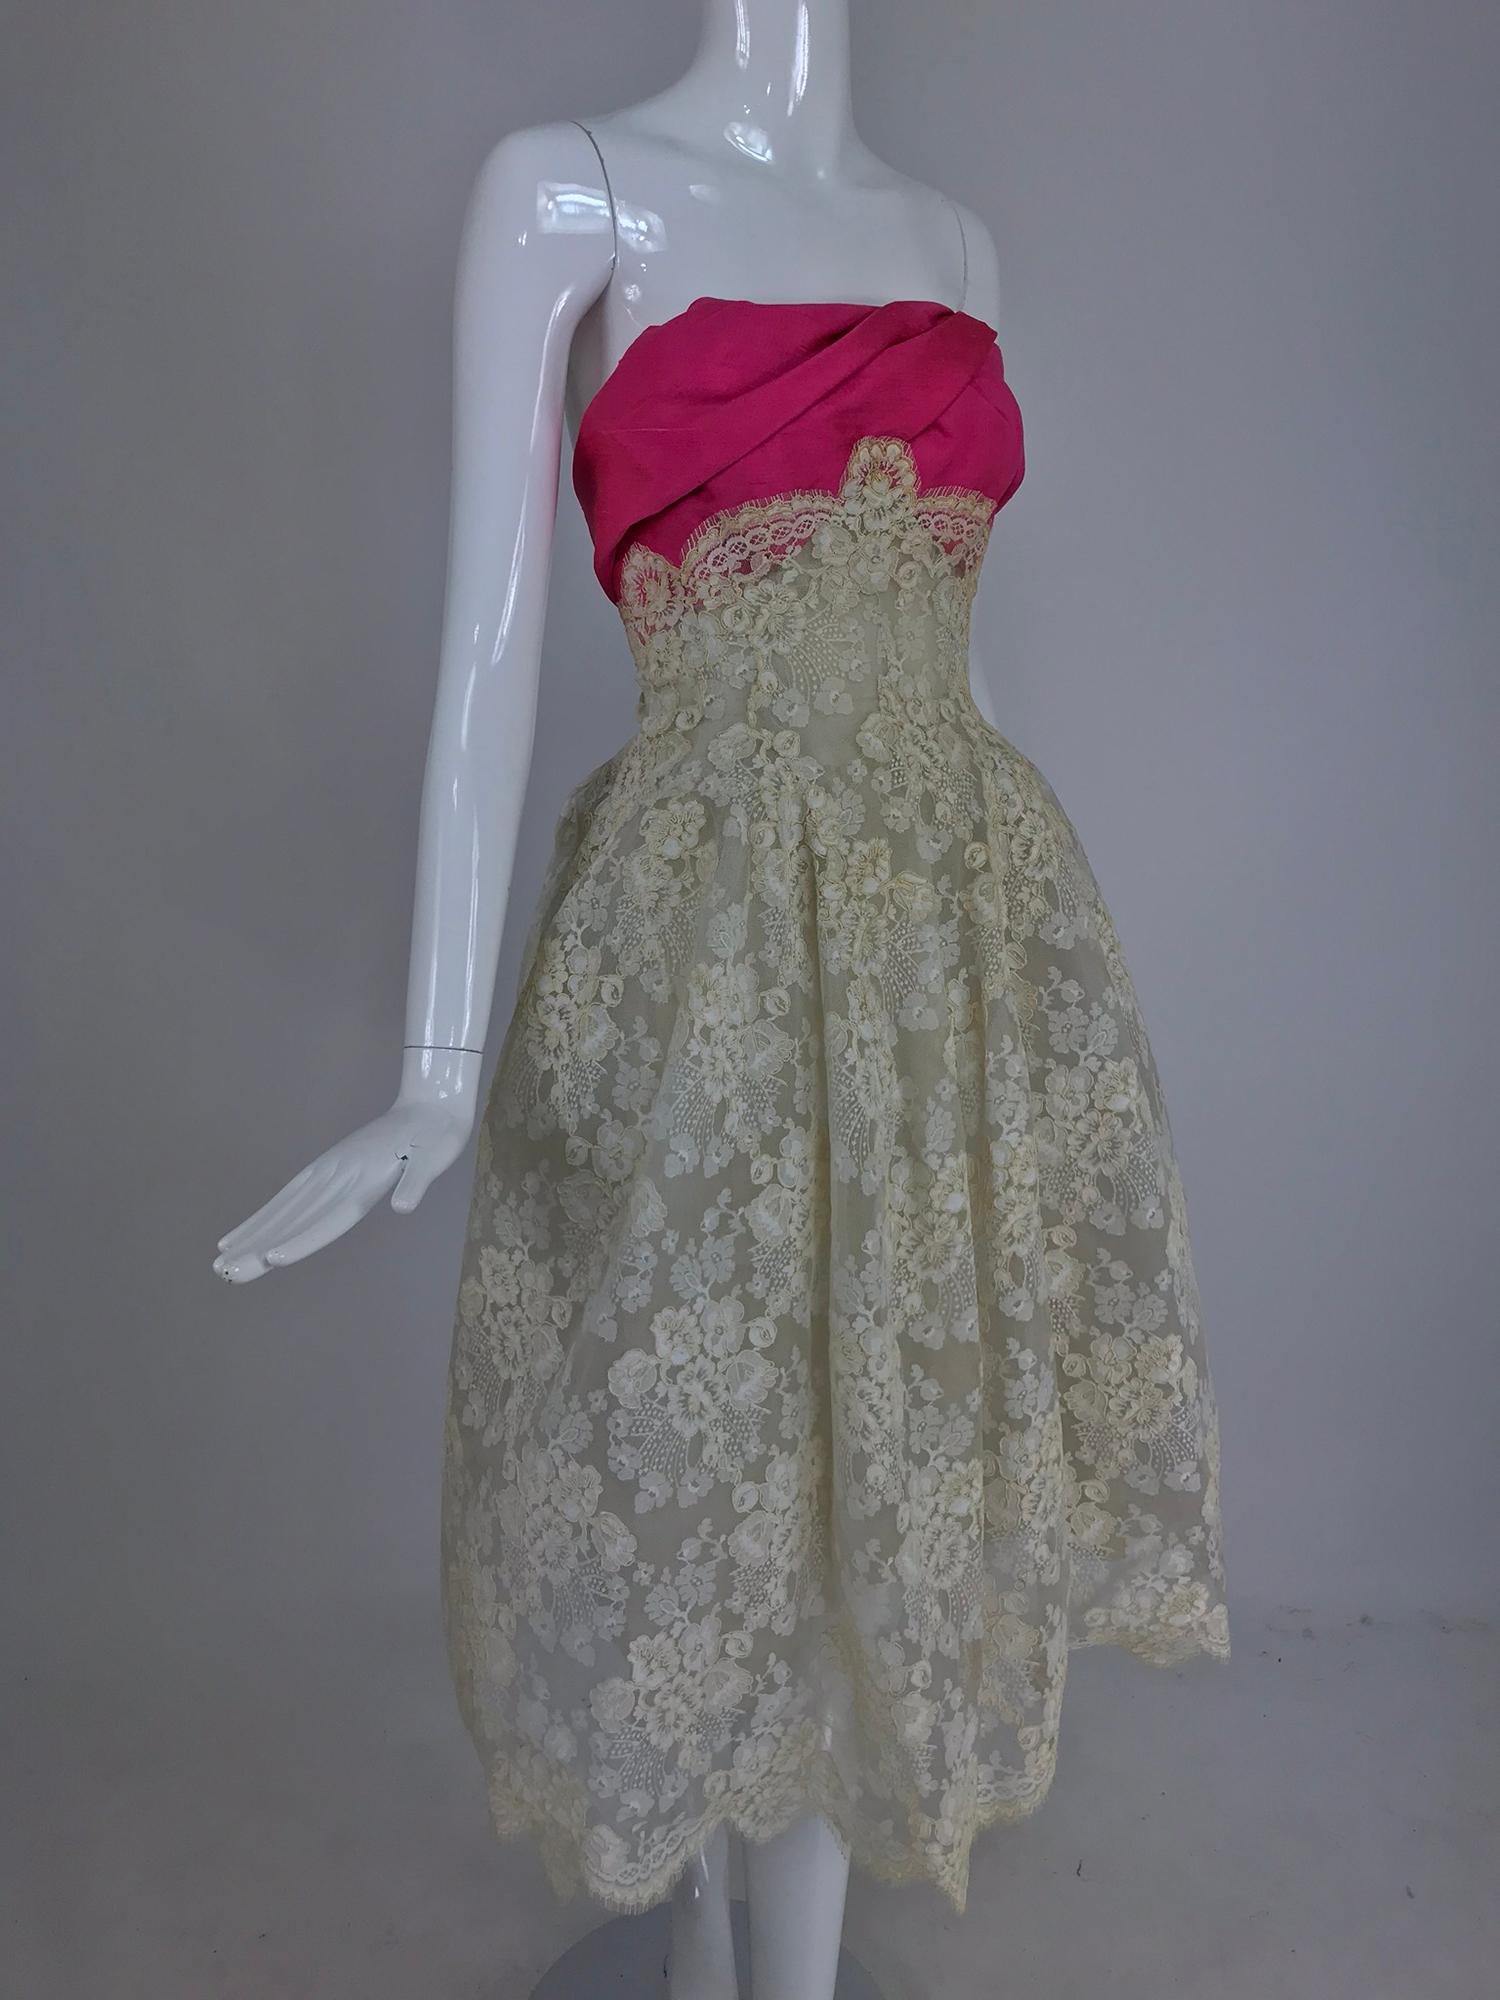 Hattie Carneige Custom couture made strapless cream guipure lace and pink silk wedding or cocktail dress from the 1950s. This gorgeous dress is handmade and a beautiful example of Carnegie's custom work, possibly designed by Gustave Tassell in the